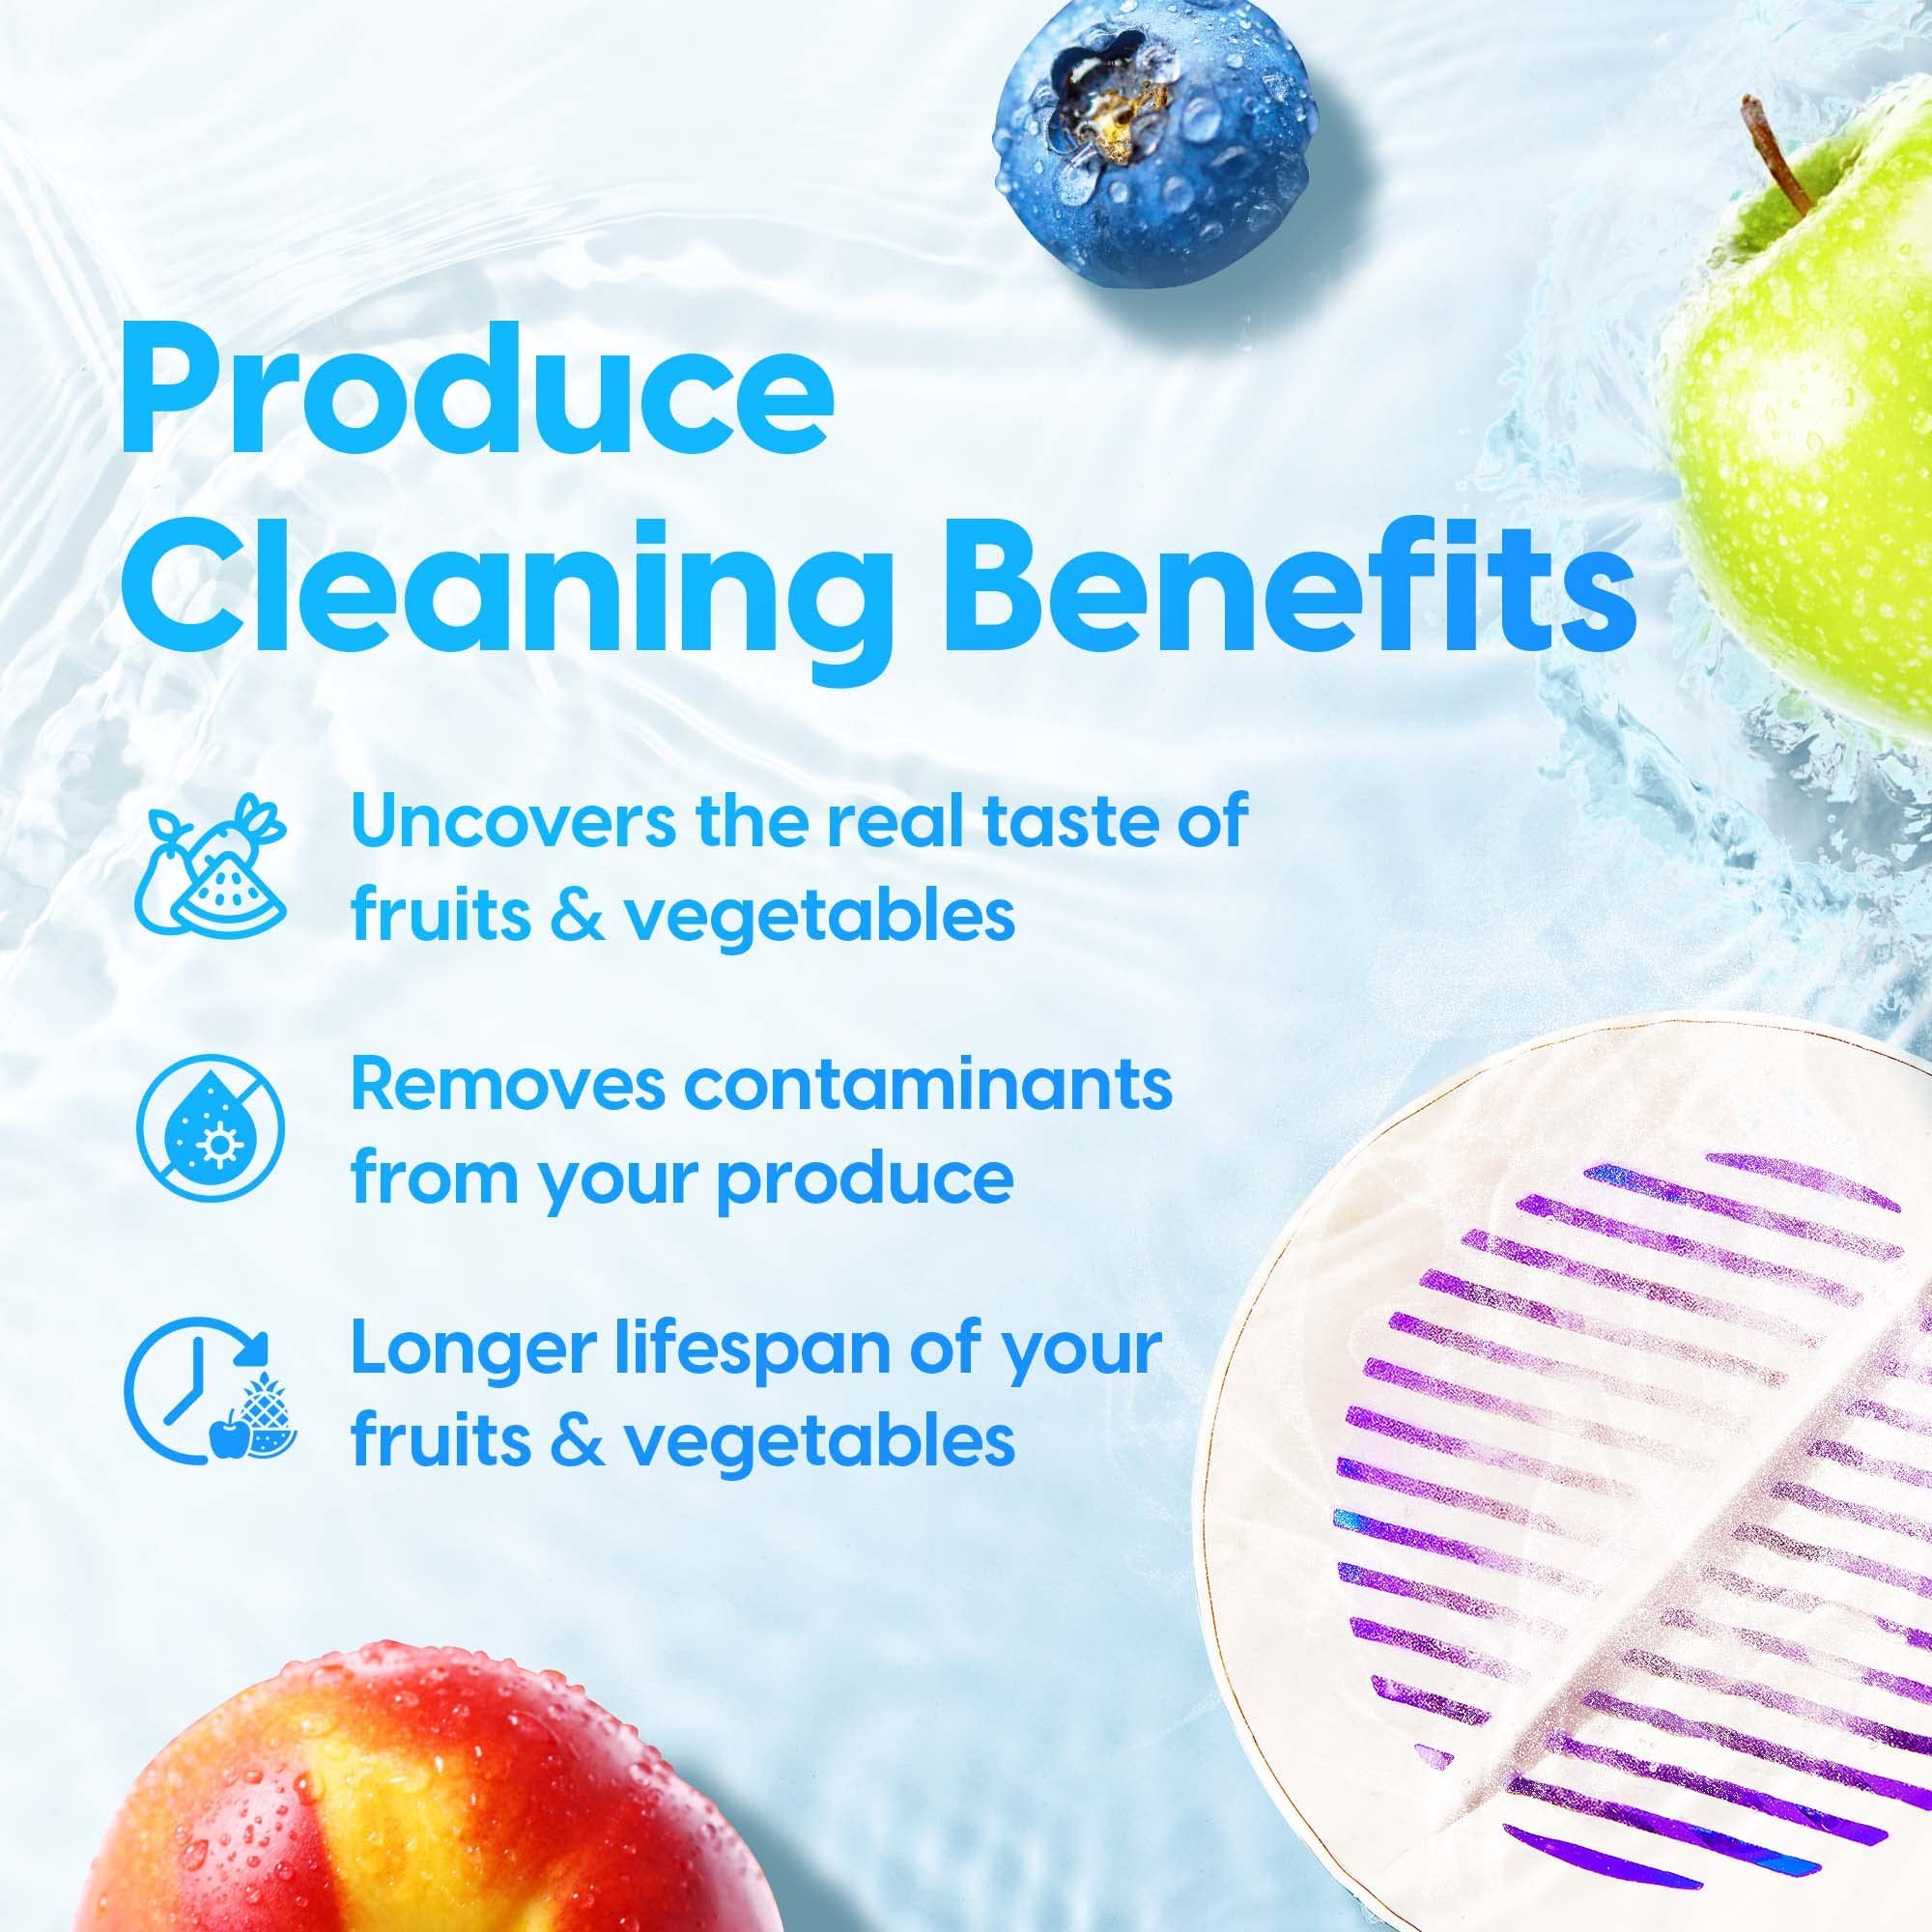 AquaPure - Fruit and Vegetable Washing Machine, Fruit Cleaner Device That Cleans Fresh Produce in Water, Waterproof Fruit and Vegetable Cleaner, Fruit and veggie Purifier, 3.94 x 1.97 in, White & Grey